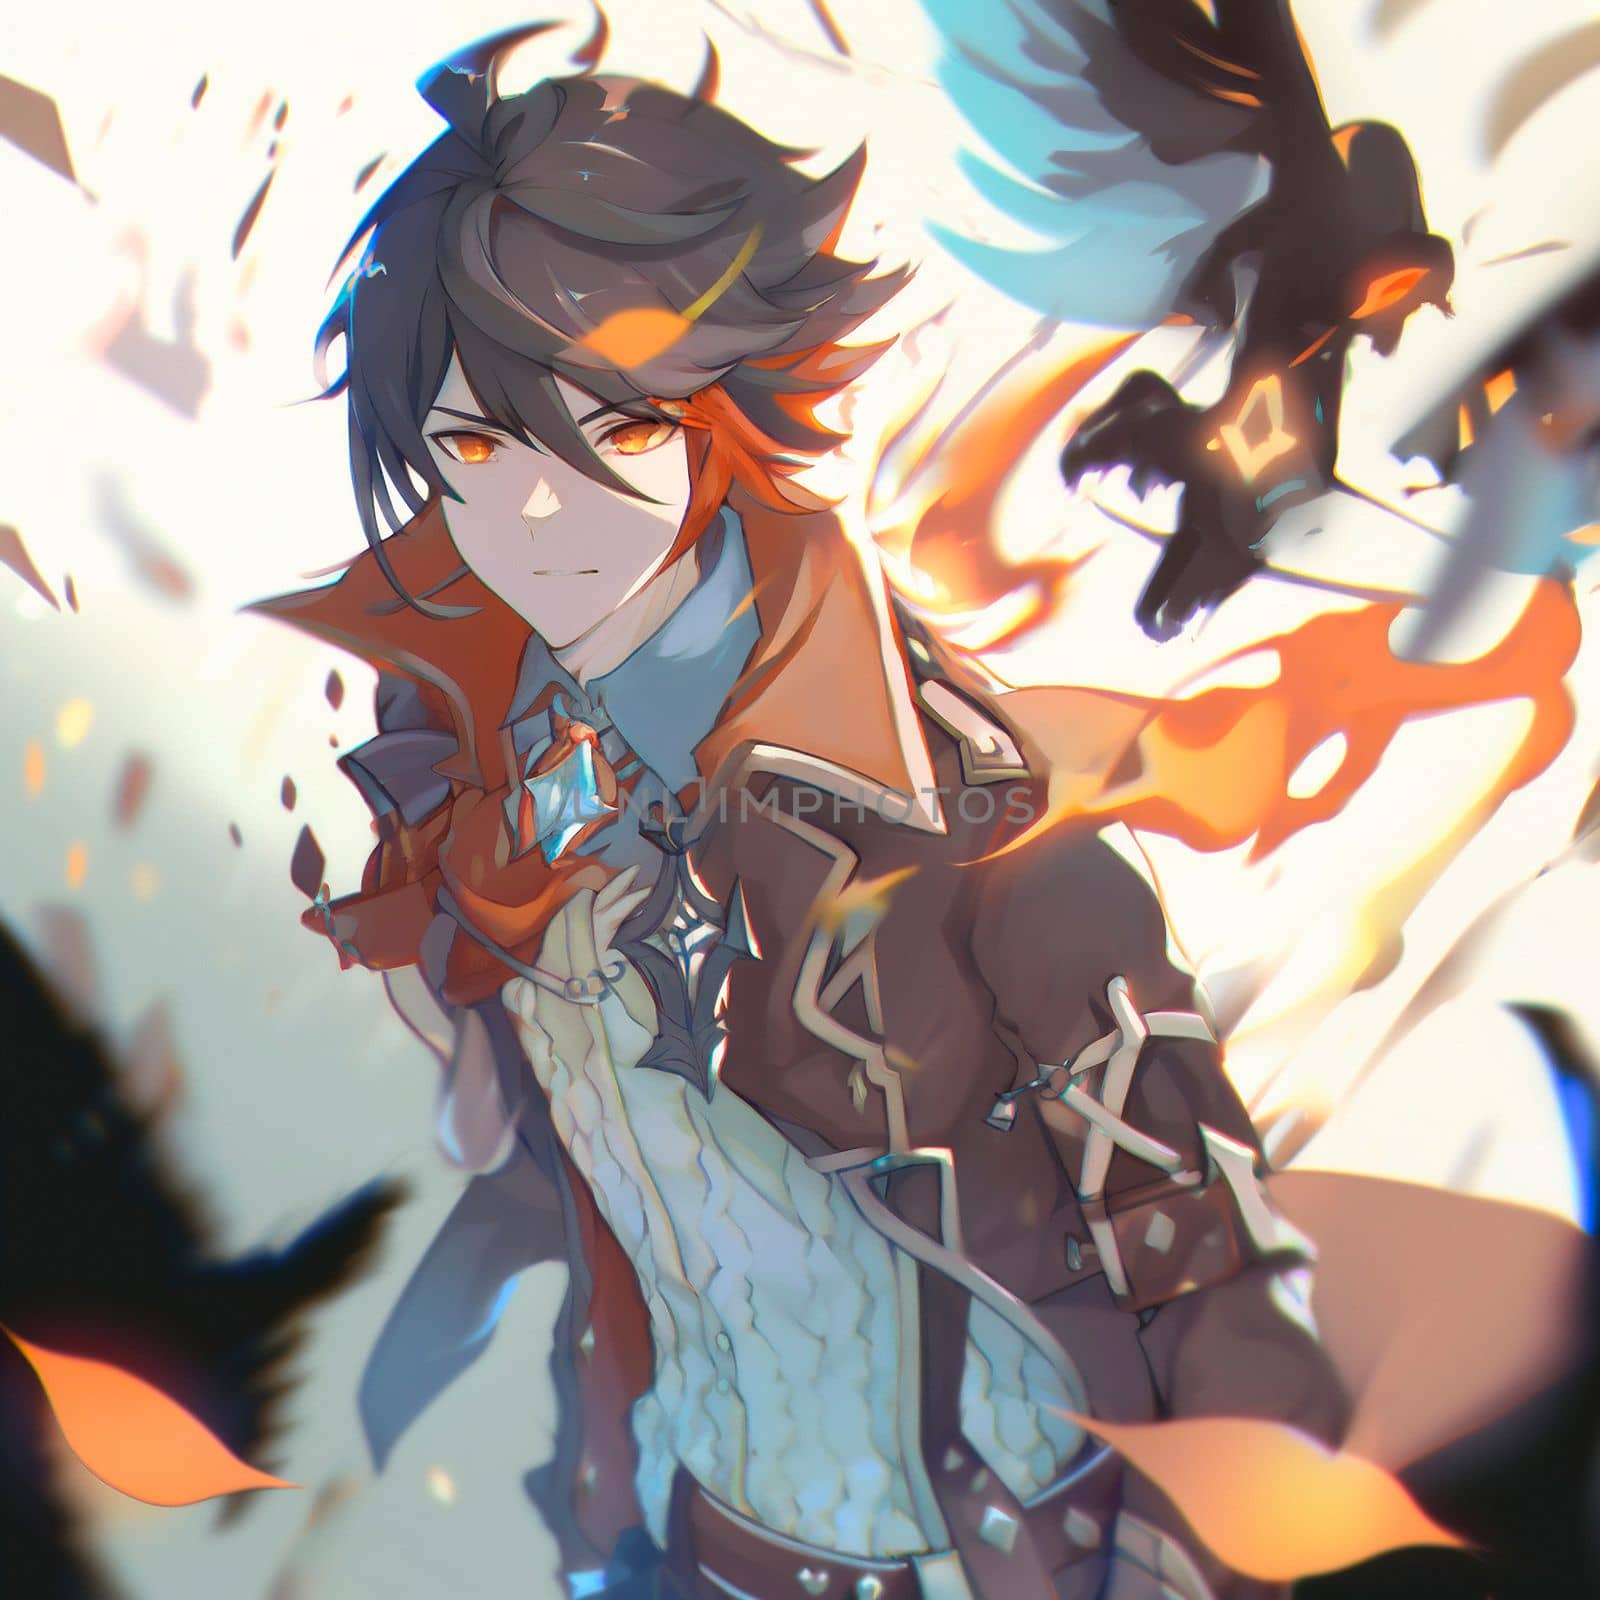 An anime - style character. High quality illustration